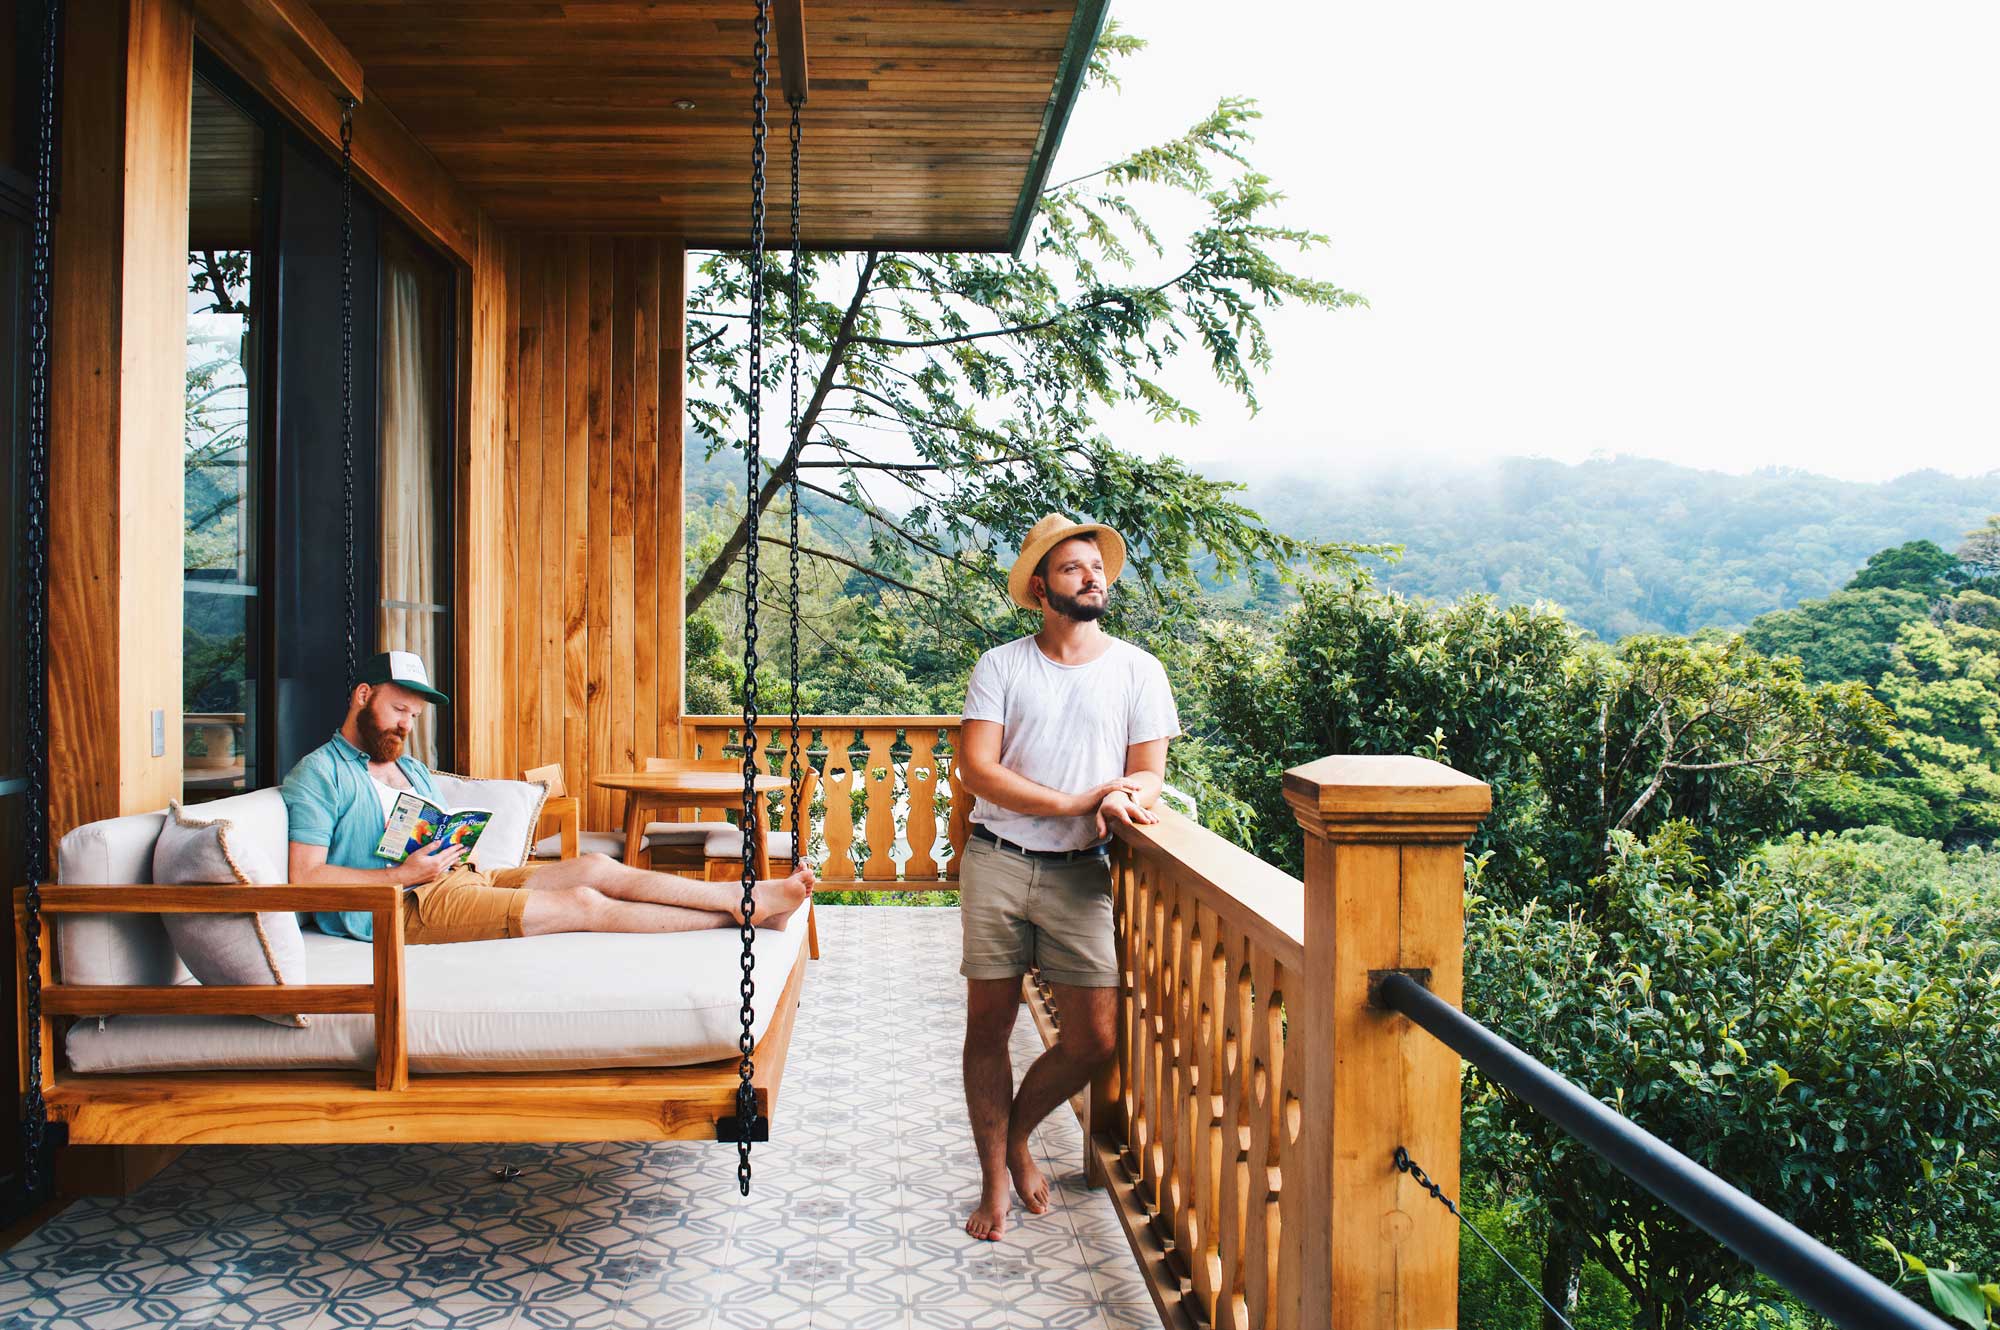 Gay Travel Journal Costa Rica Gay Travel Guides 2018 Enjoying the view over the cloud forest Monteverde | Exploring Gay-friendly Costa Rica hand-in-hand together © Coupleofmen.com